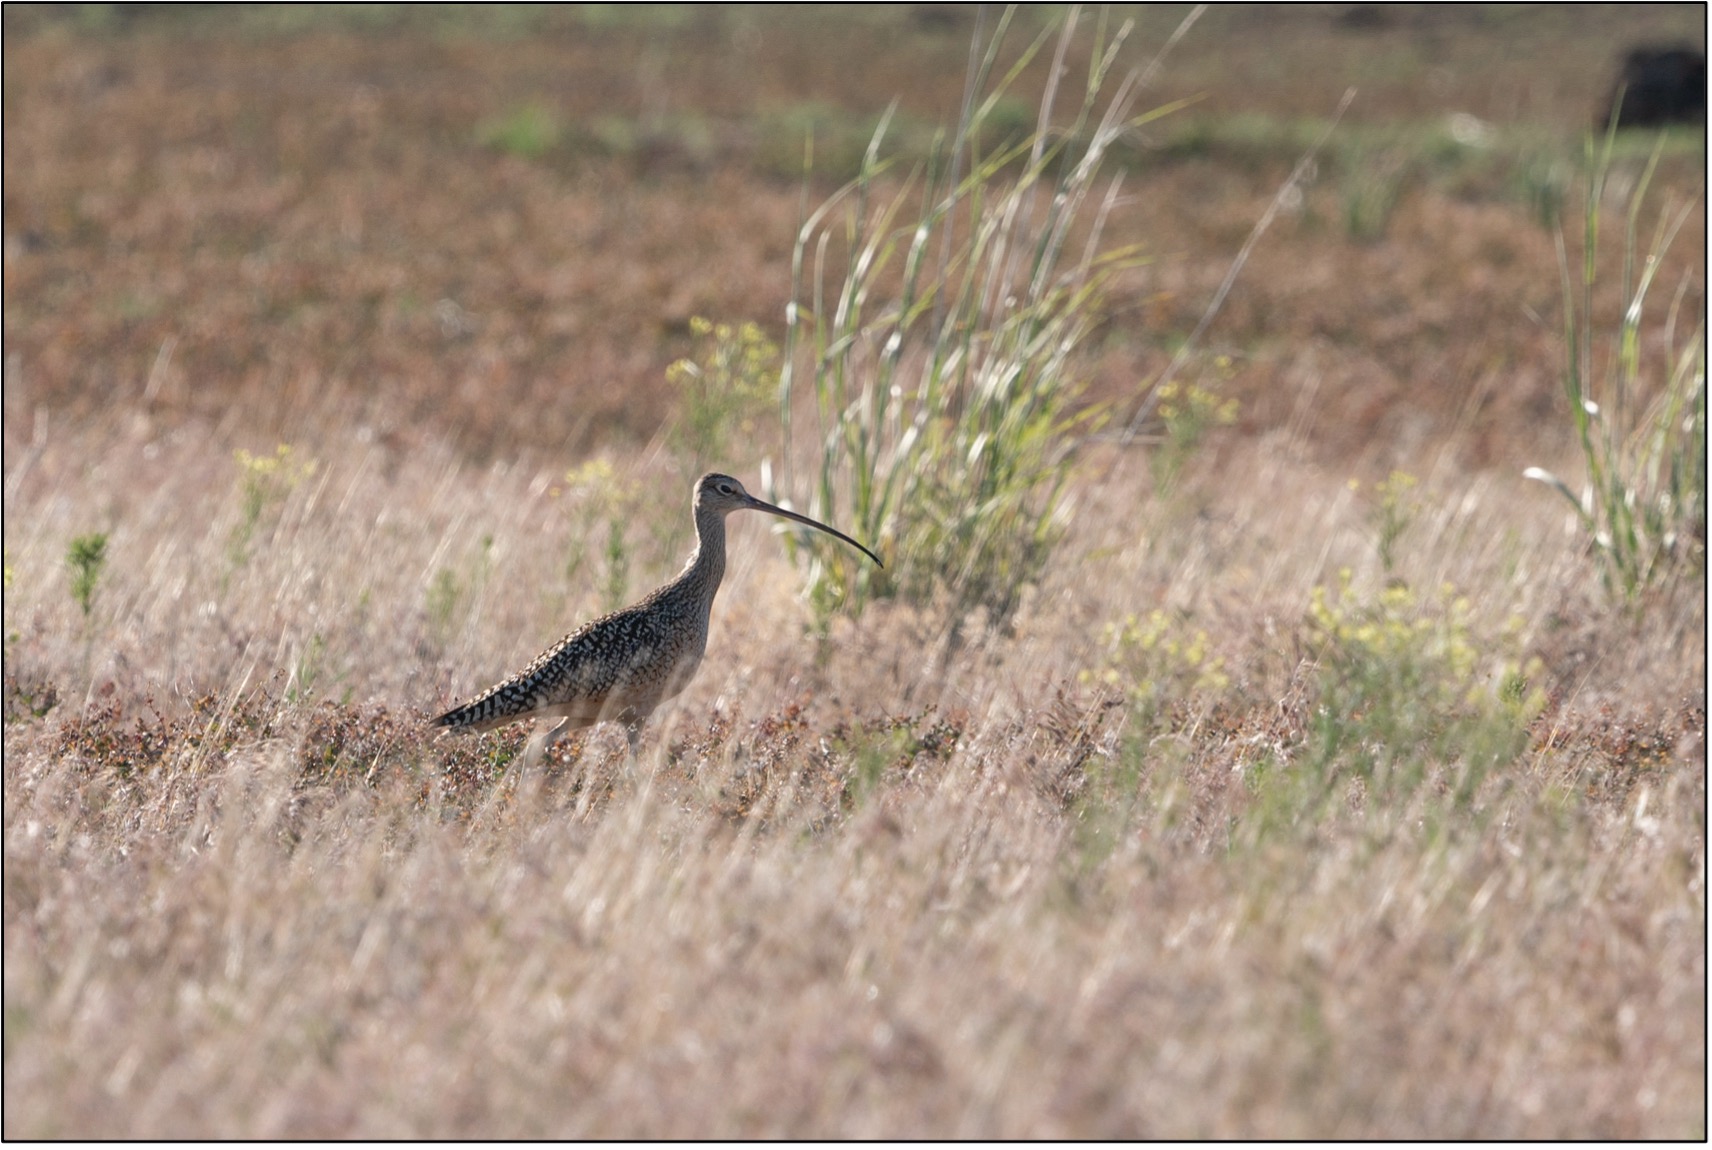 a curlew walks through short brown grass. its neck is outstretched and its long sickle-like bill is curving down